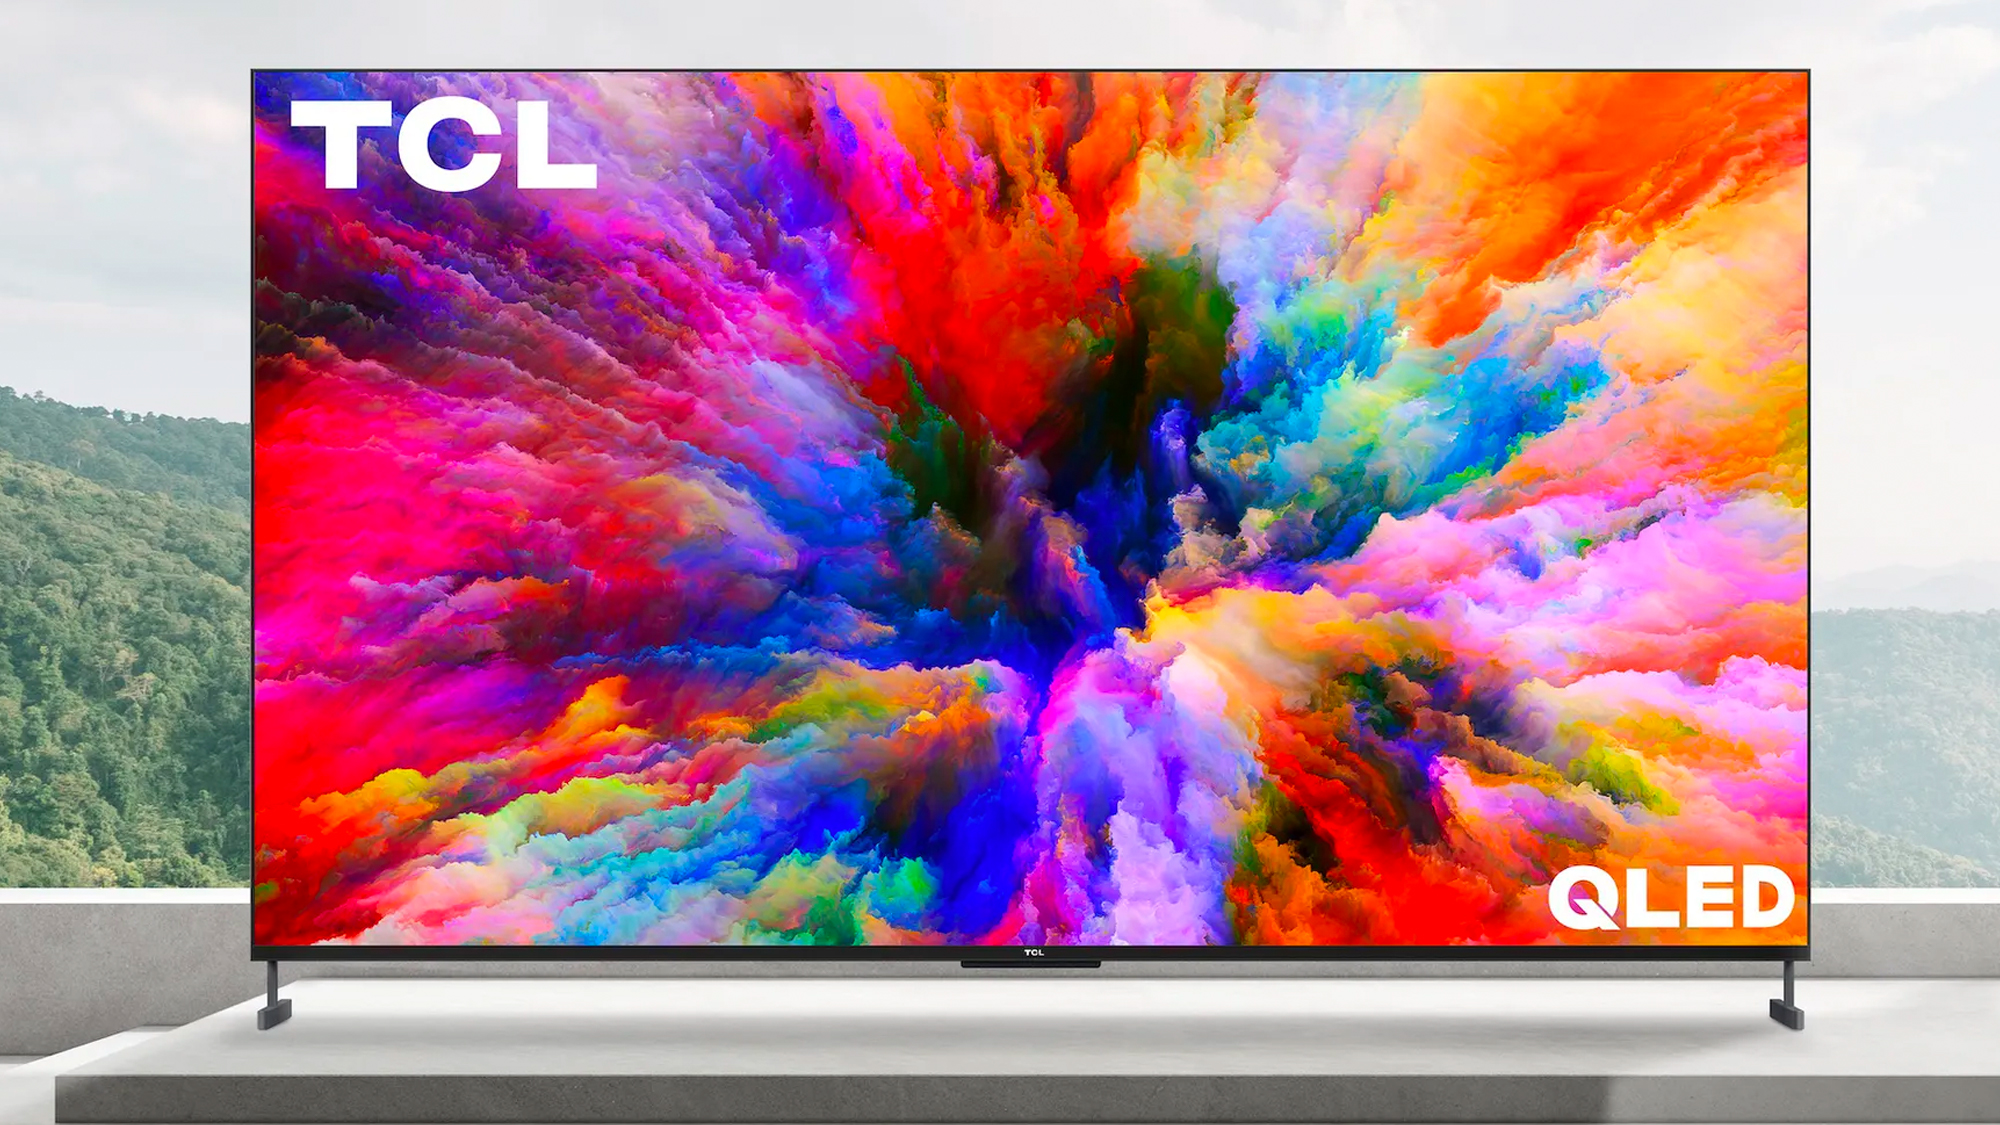 TCL XL 98-inch TV